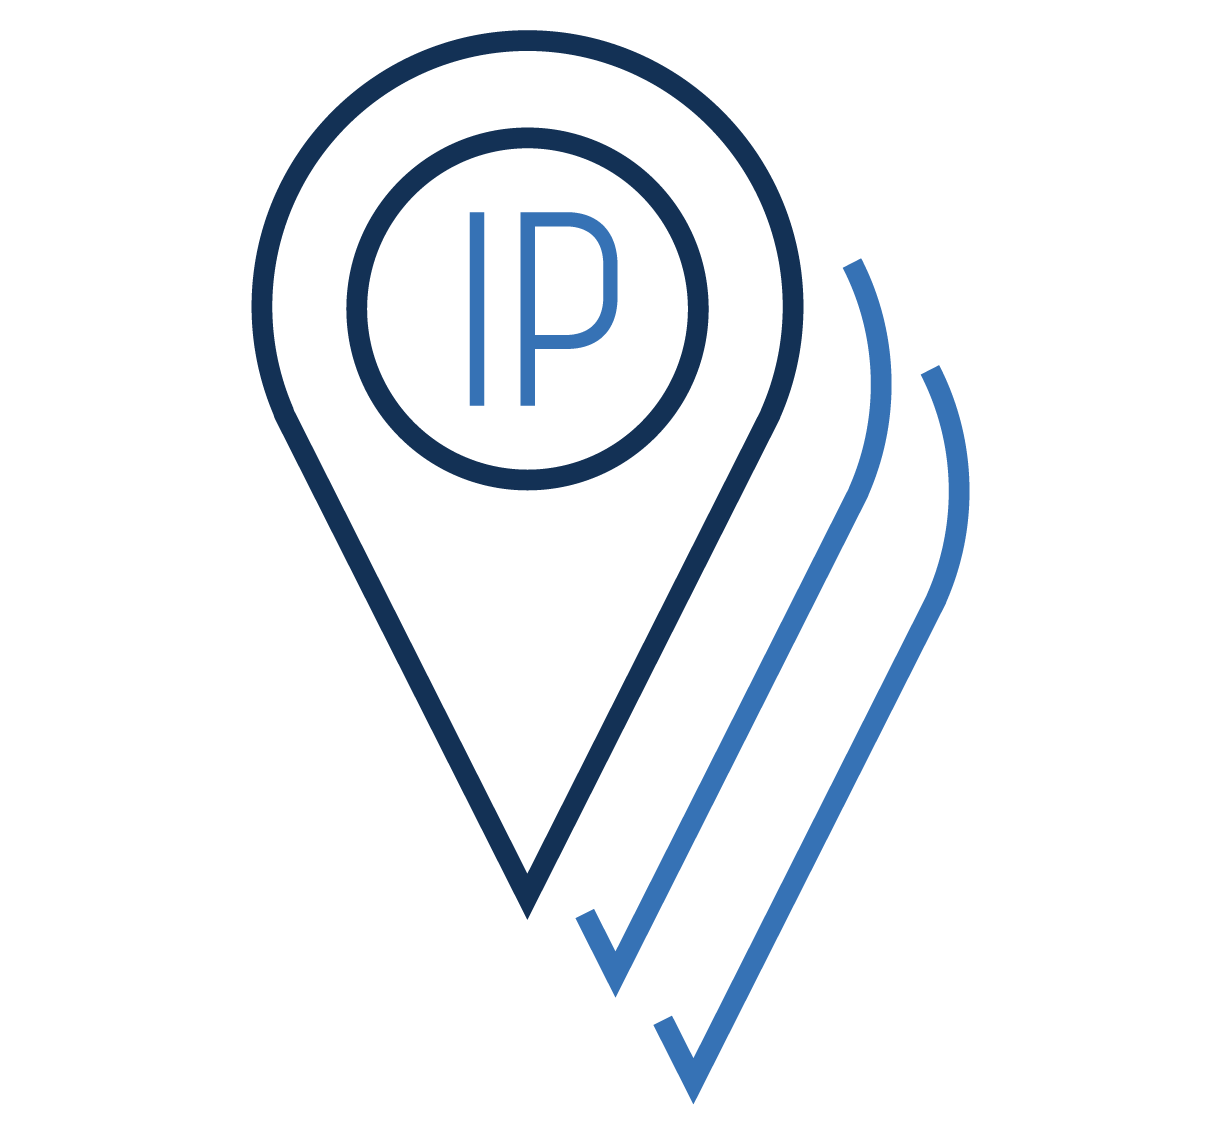 An icon representing thousands of IP addresses available through Mapper for network routing purposes.